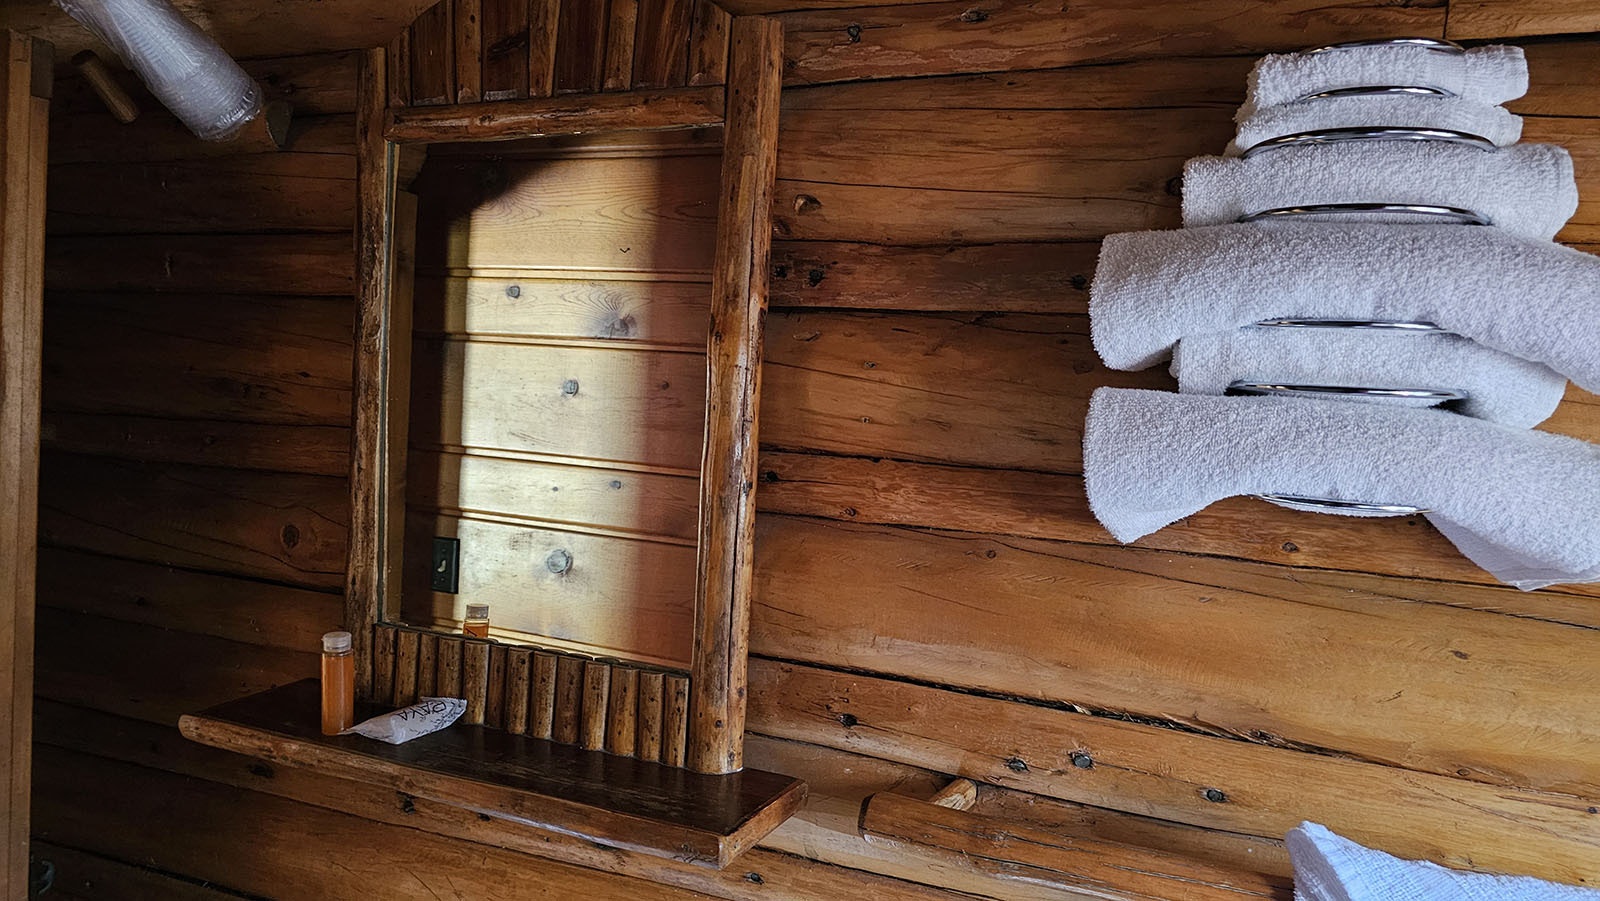 The original cabins feature lots of rustic, handmade fixtures, like this one.